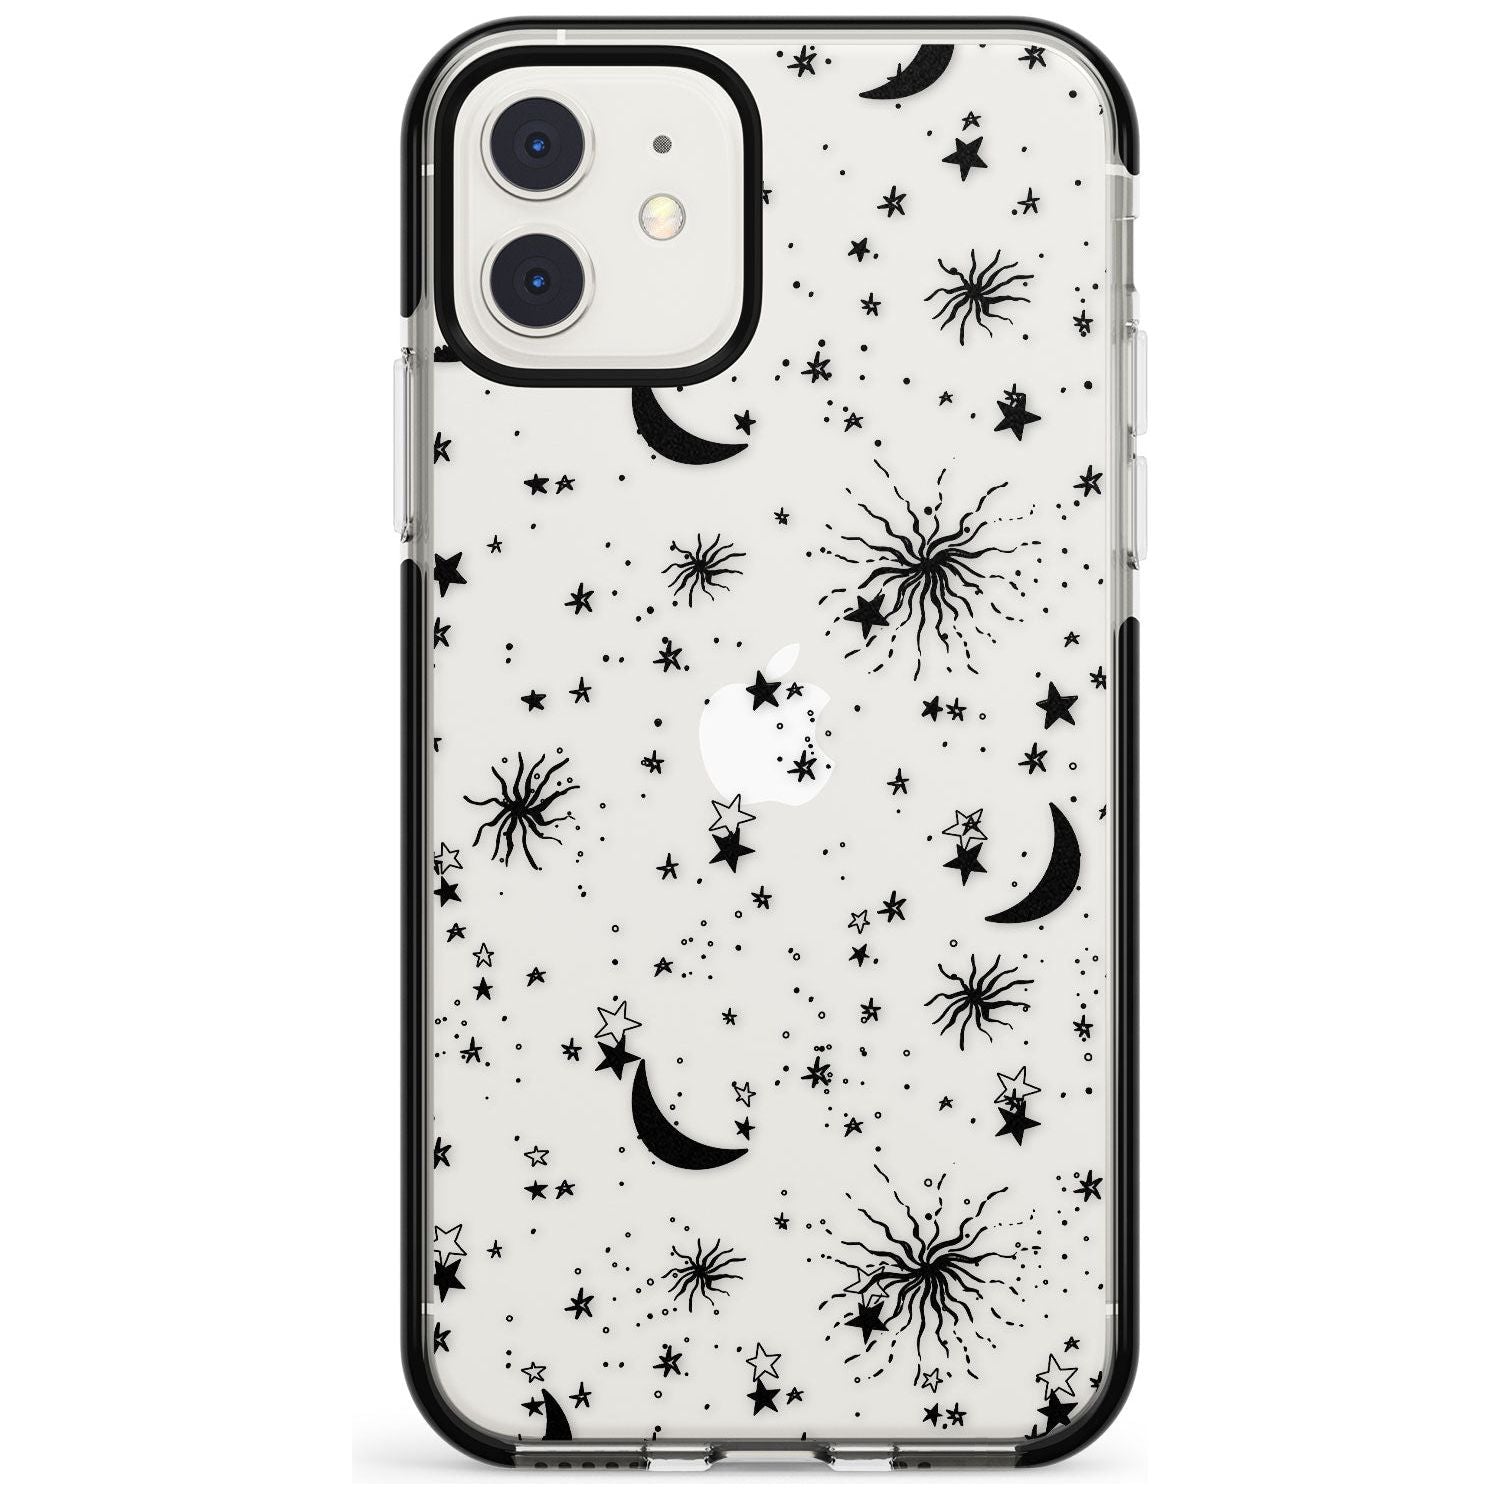 Moons & Stars Black Impact Phone Case for iPhone 11